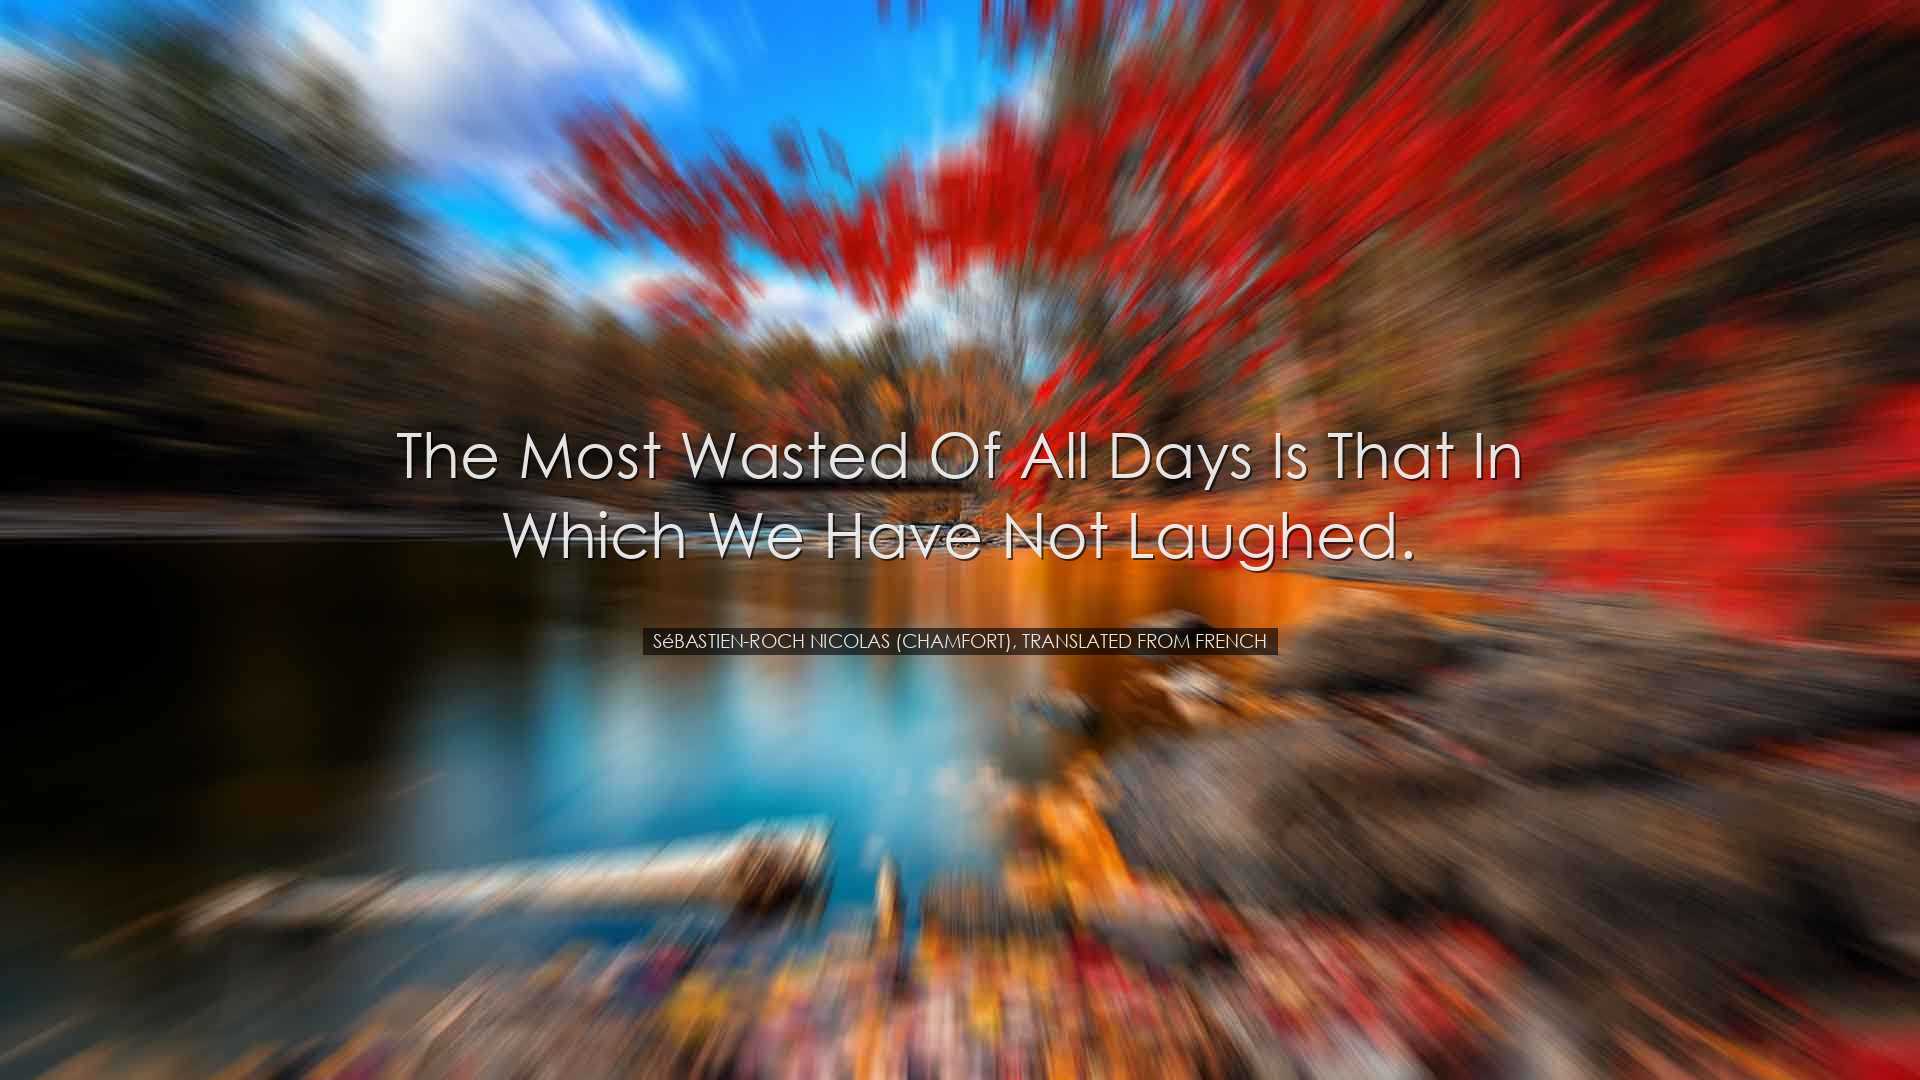 The most wasted of all days is that in which we have not laughed.